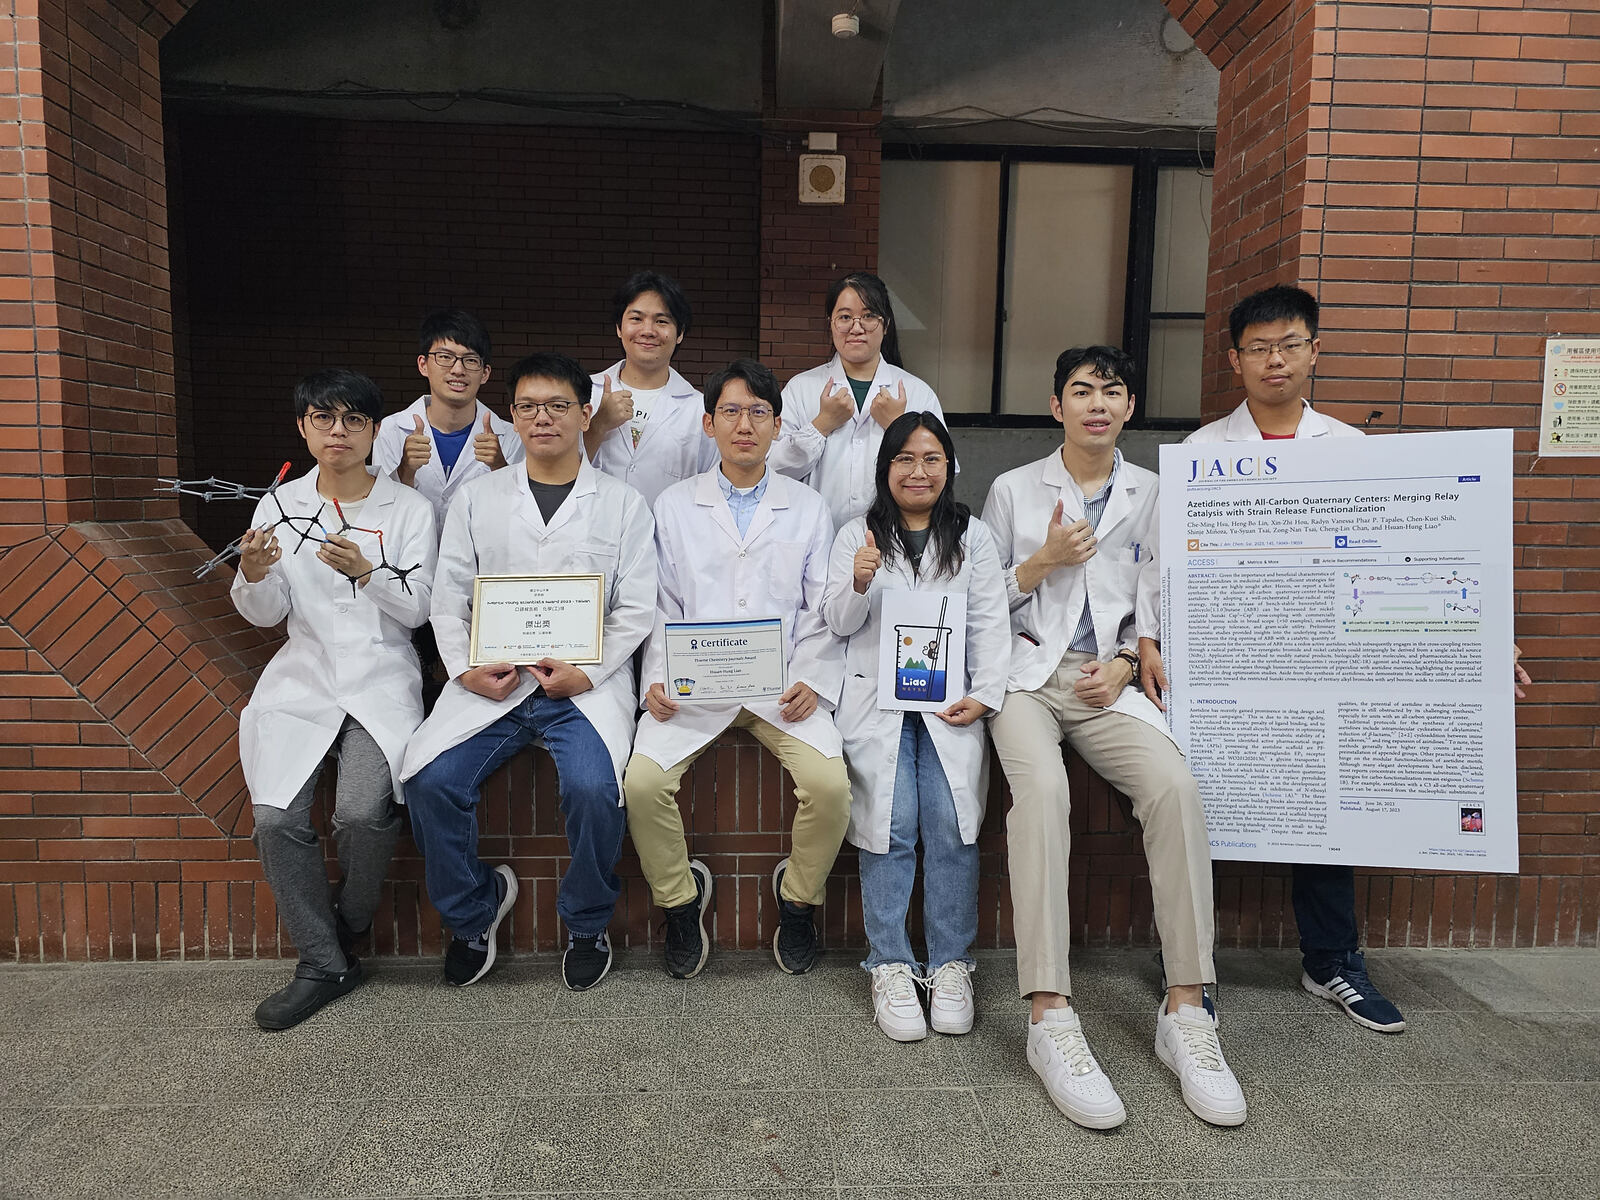 After four years of in-depth research, the group of Hsuan-Hung Liao (in the center of the front row), an associate professor in the Department of Chemistry at National Sun Yat-sen University (NSYSU) and a recipient of the Yushan Young Fellow Program, pioneered the world's first polar-radical relay catalysis strategy, which not only successfully prepared the key molecular structure "Azetidine," but also successfully applied it to the synthesis of small molecule drugs, and developed two new drug candidates. This innovative research result was published in the Journal of the American Chemical Society (JACS), an internationally renowned chemistry journal.